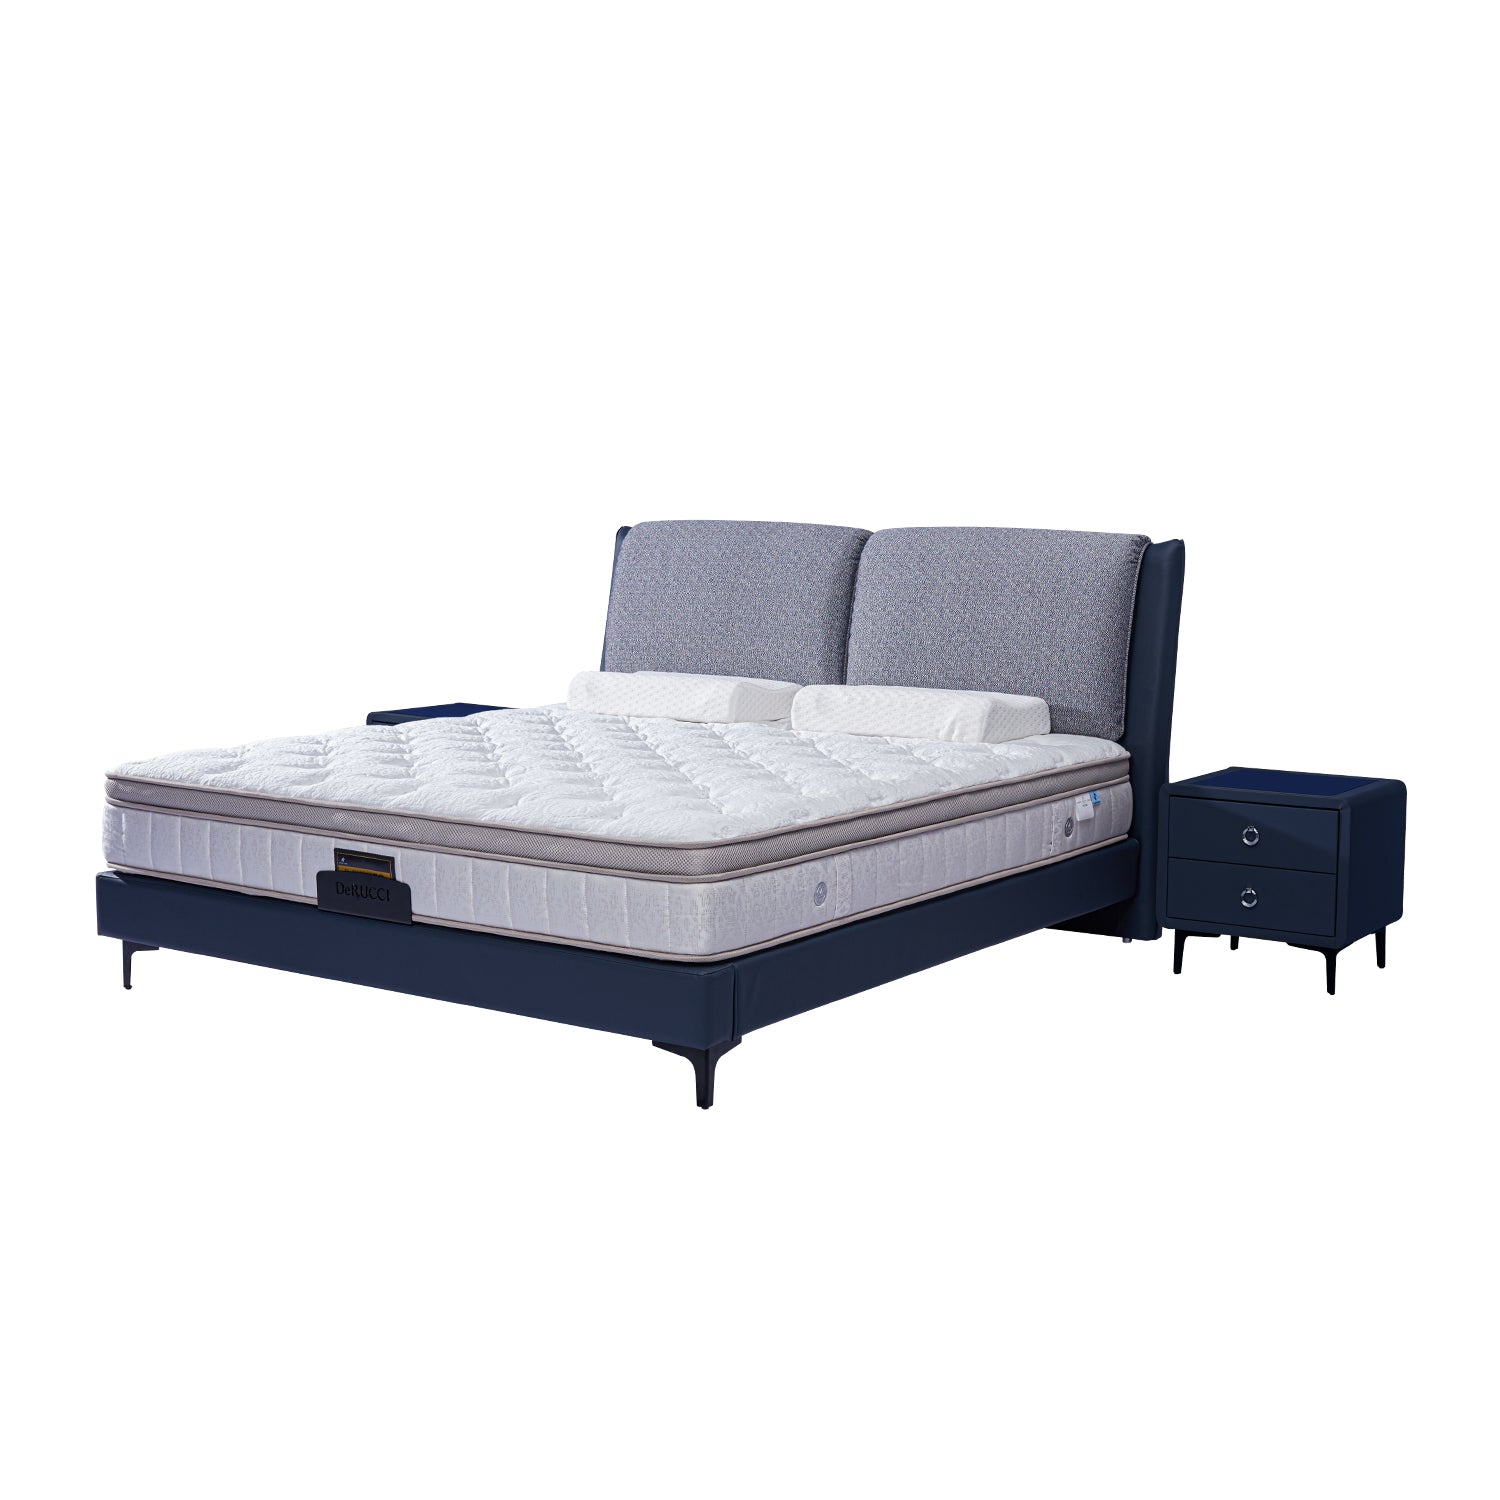 DeRUCCI Bed Frame BOC1 - 017 with gray upholstered headboard and mattress, dark-colored bed frame, and matching nightstand with two drawers.